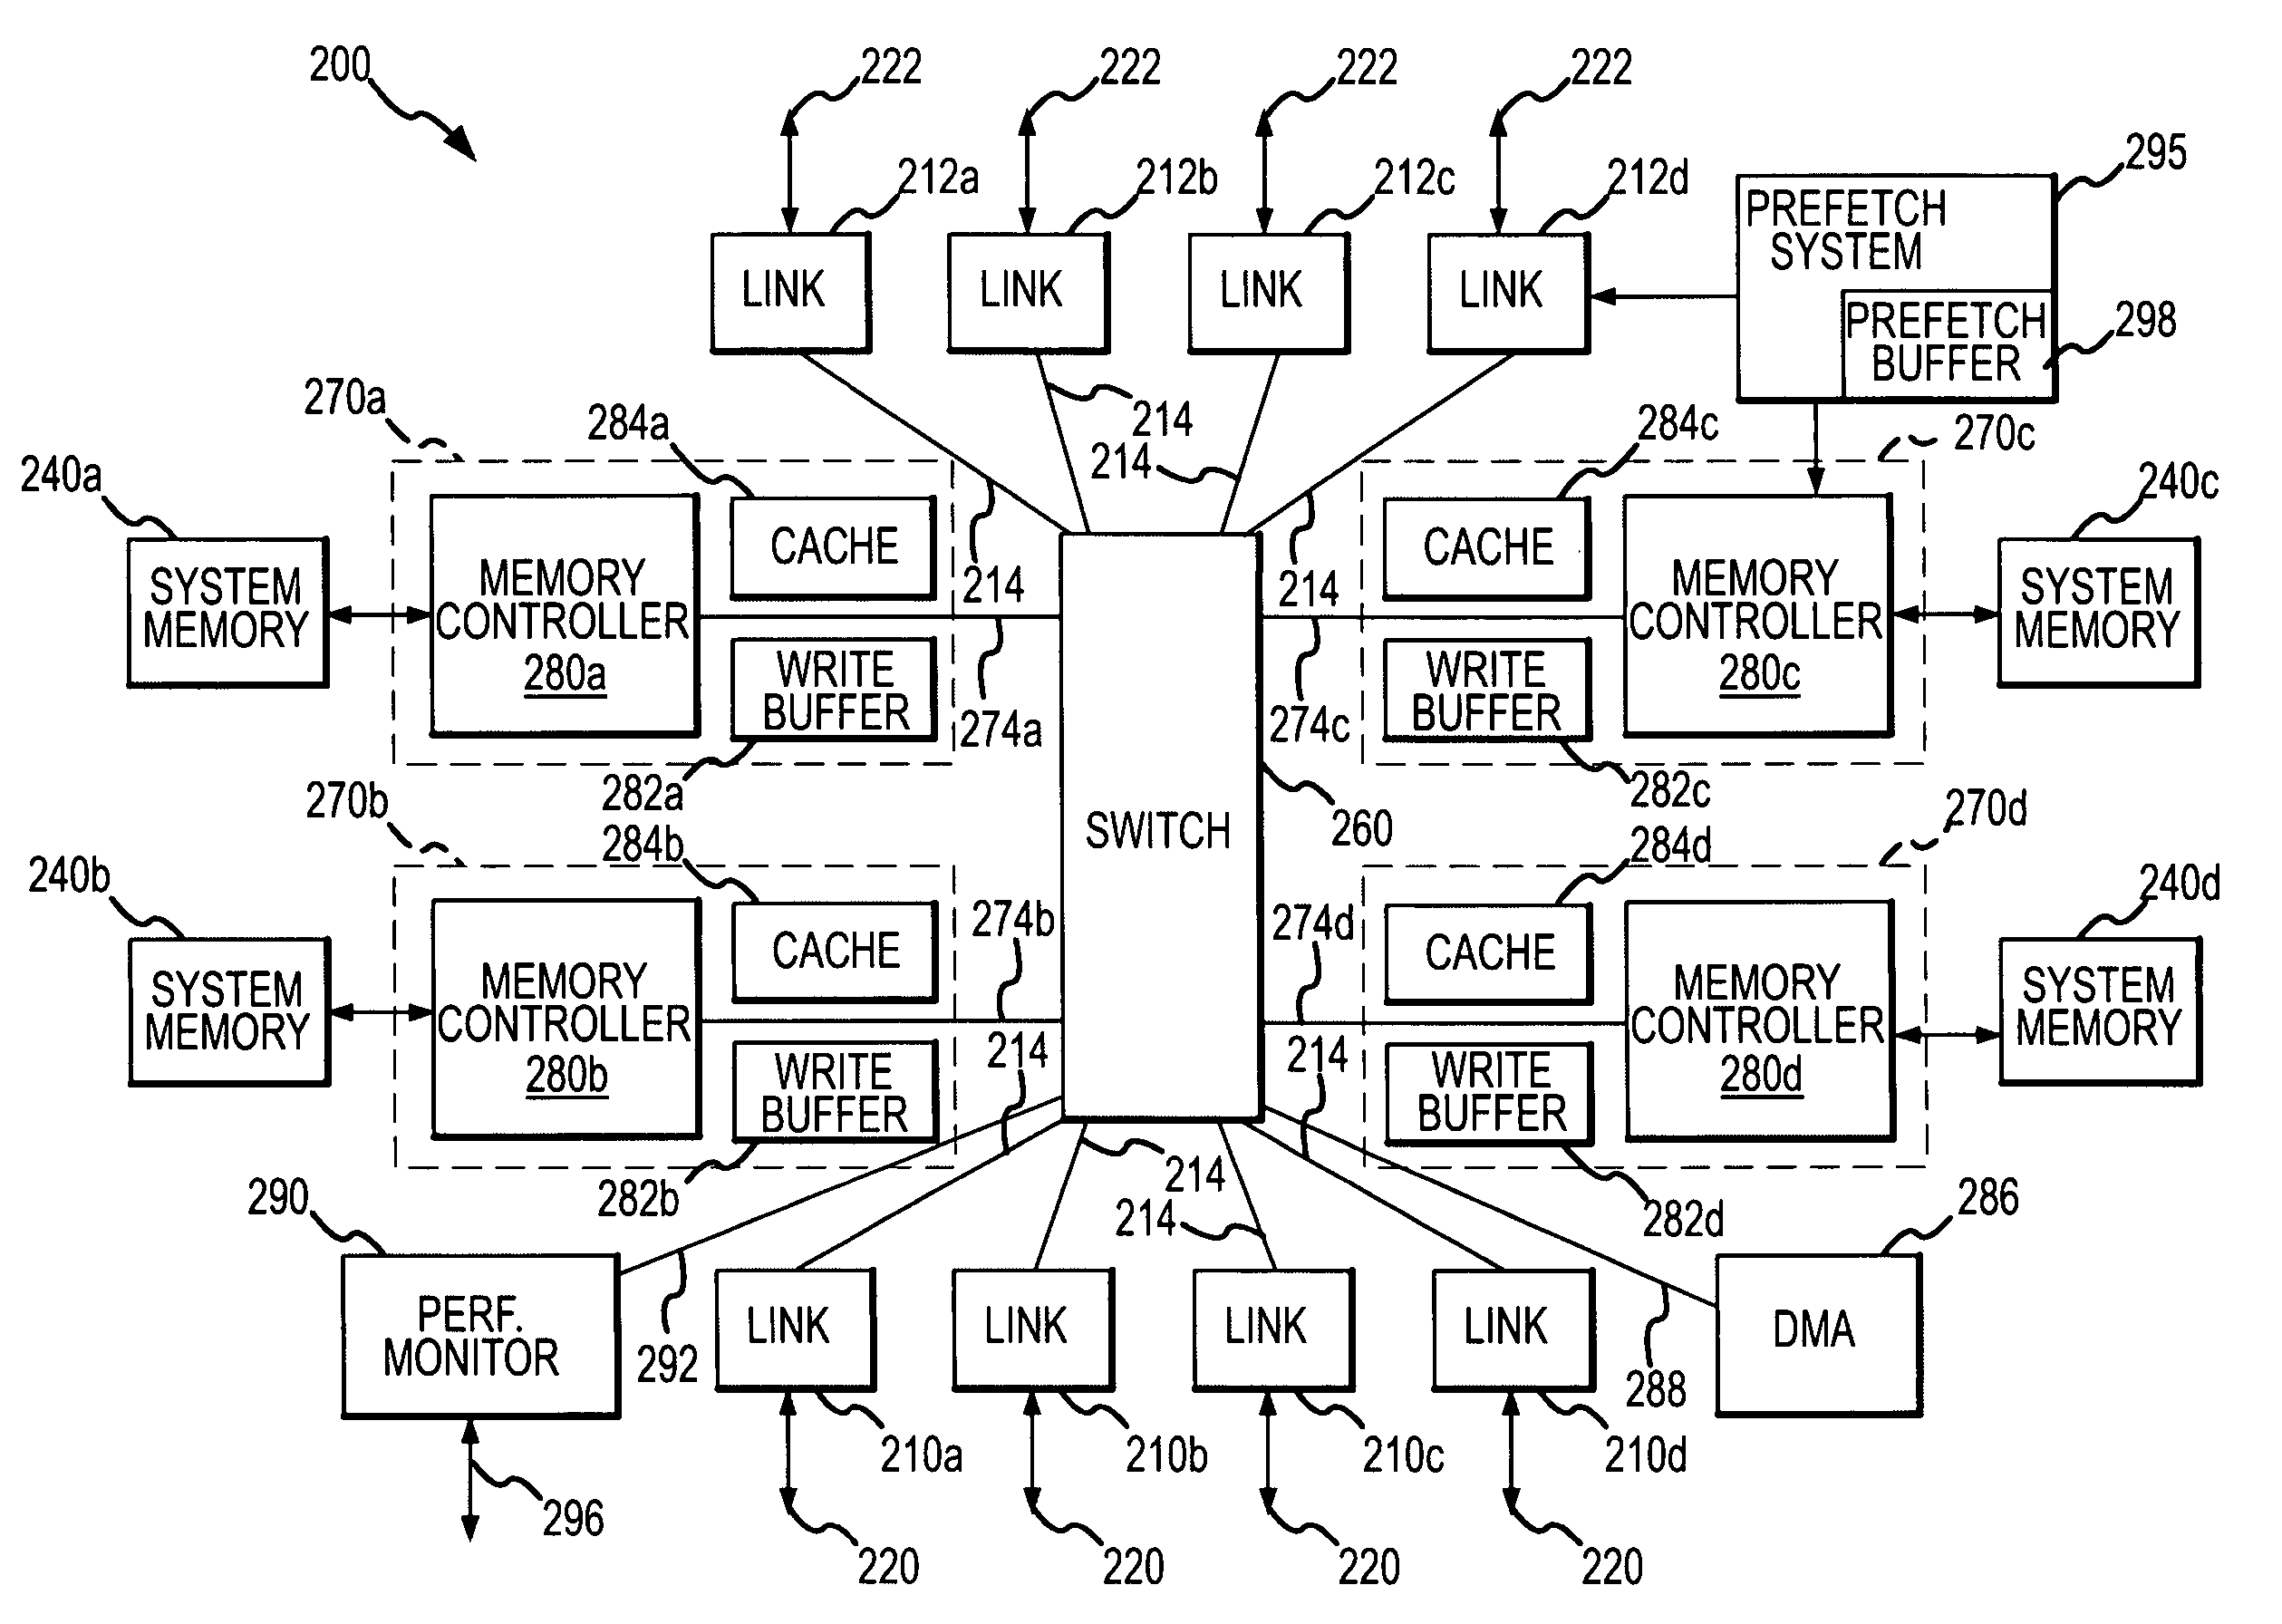 Memory hub and method for memory system performance monitoring